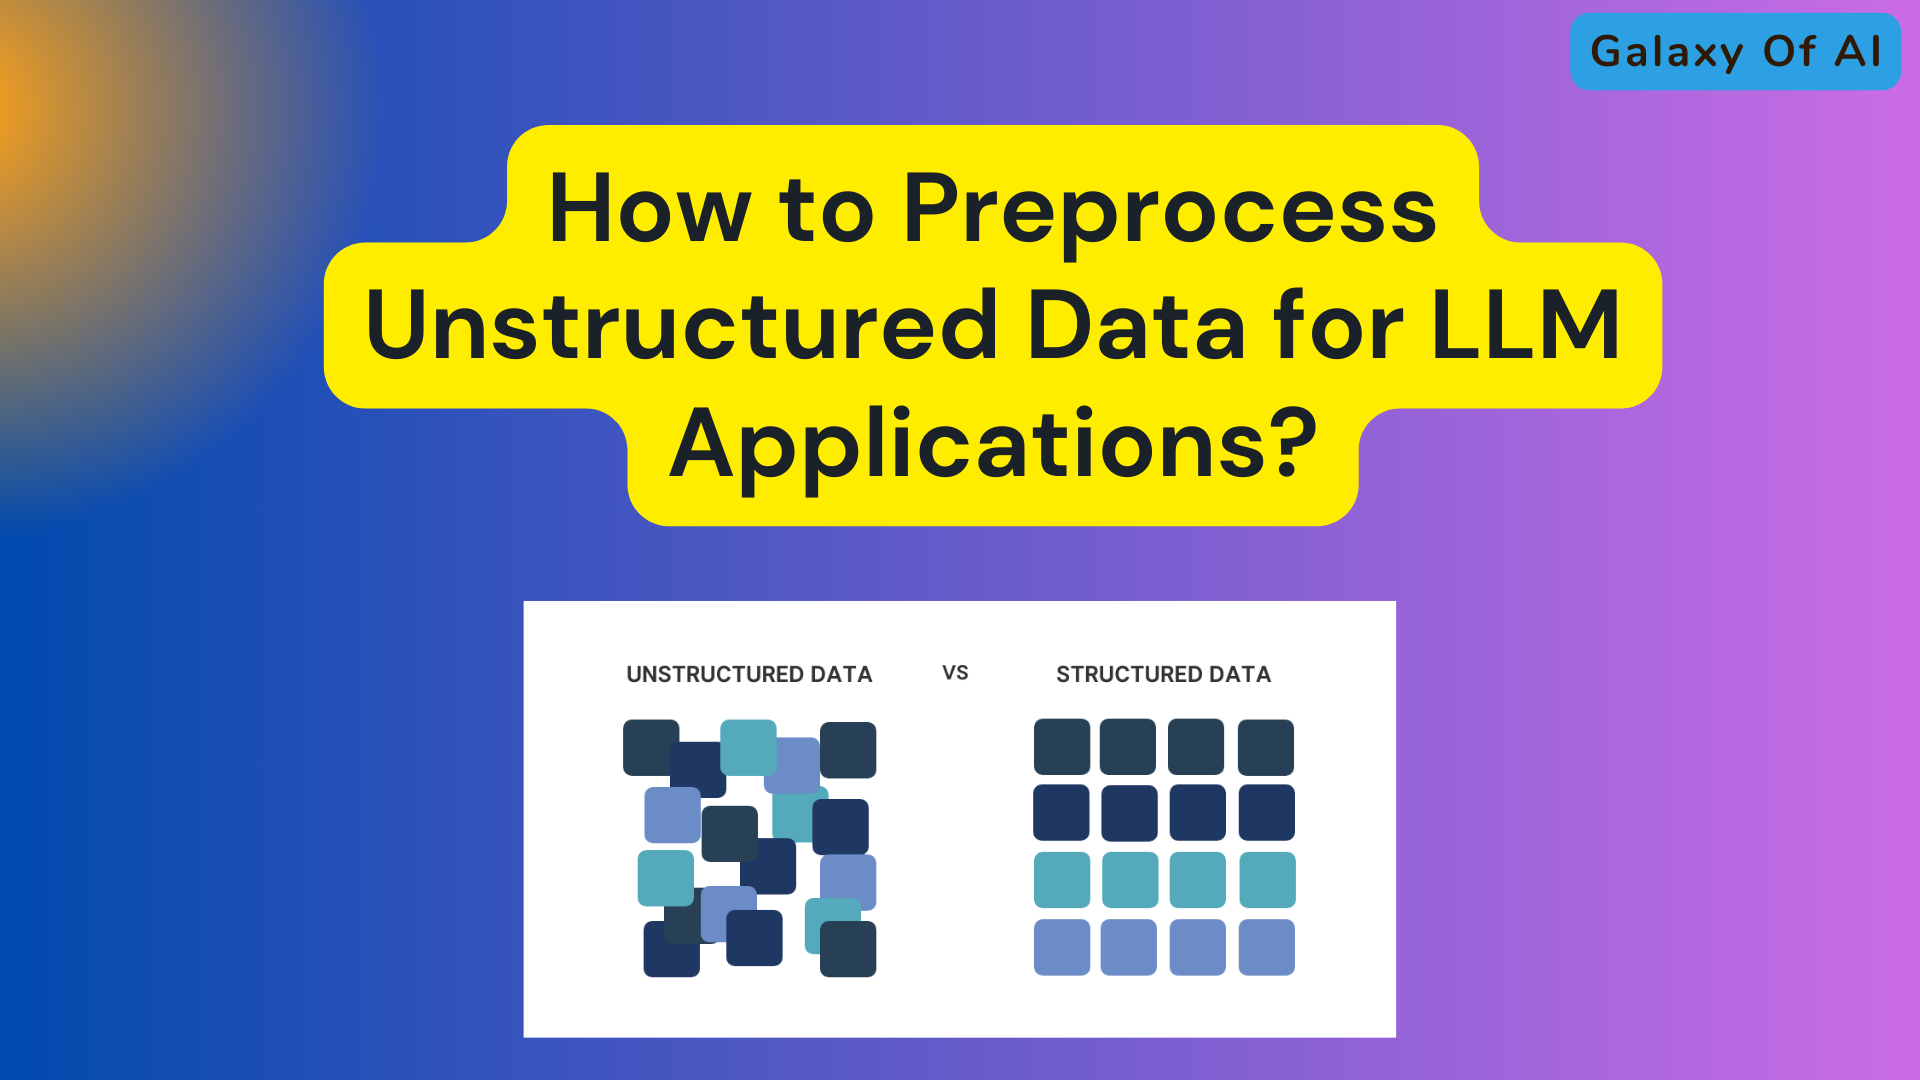 How to Preprocess Unstructured Data for LLM Applications?